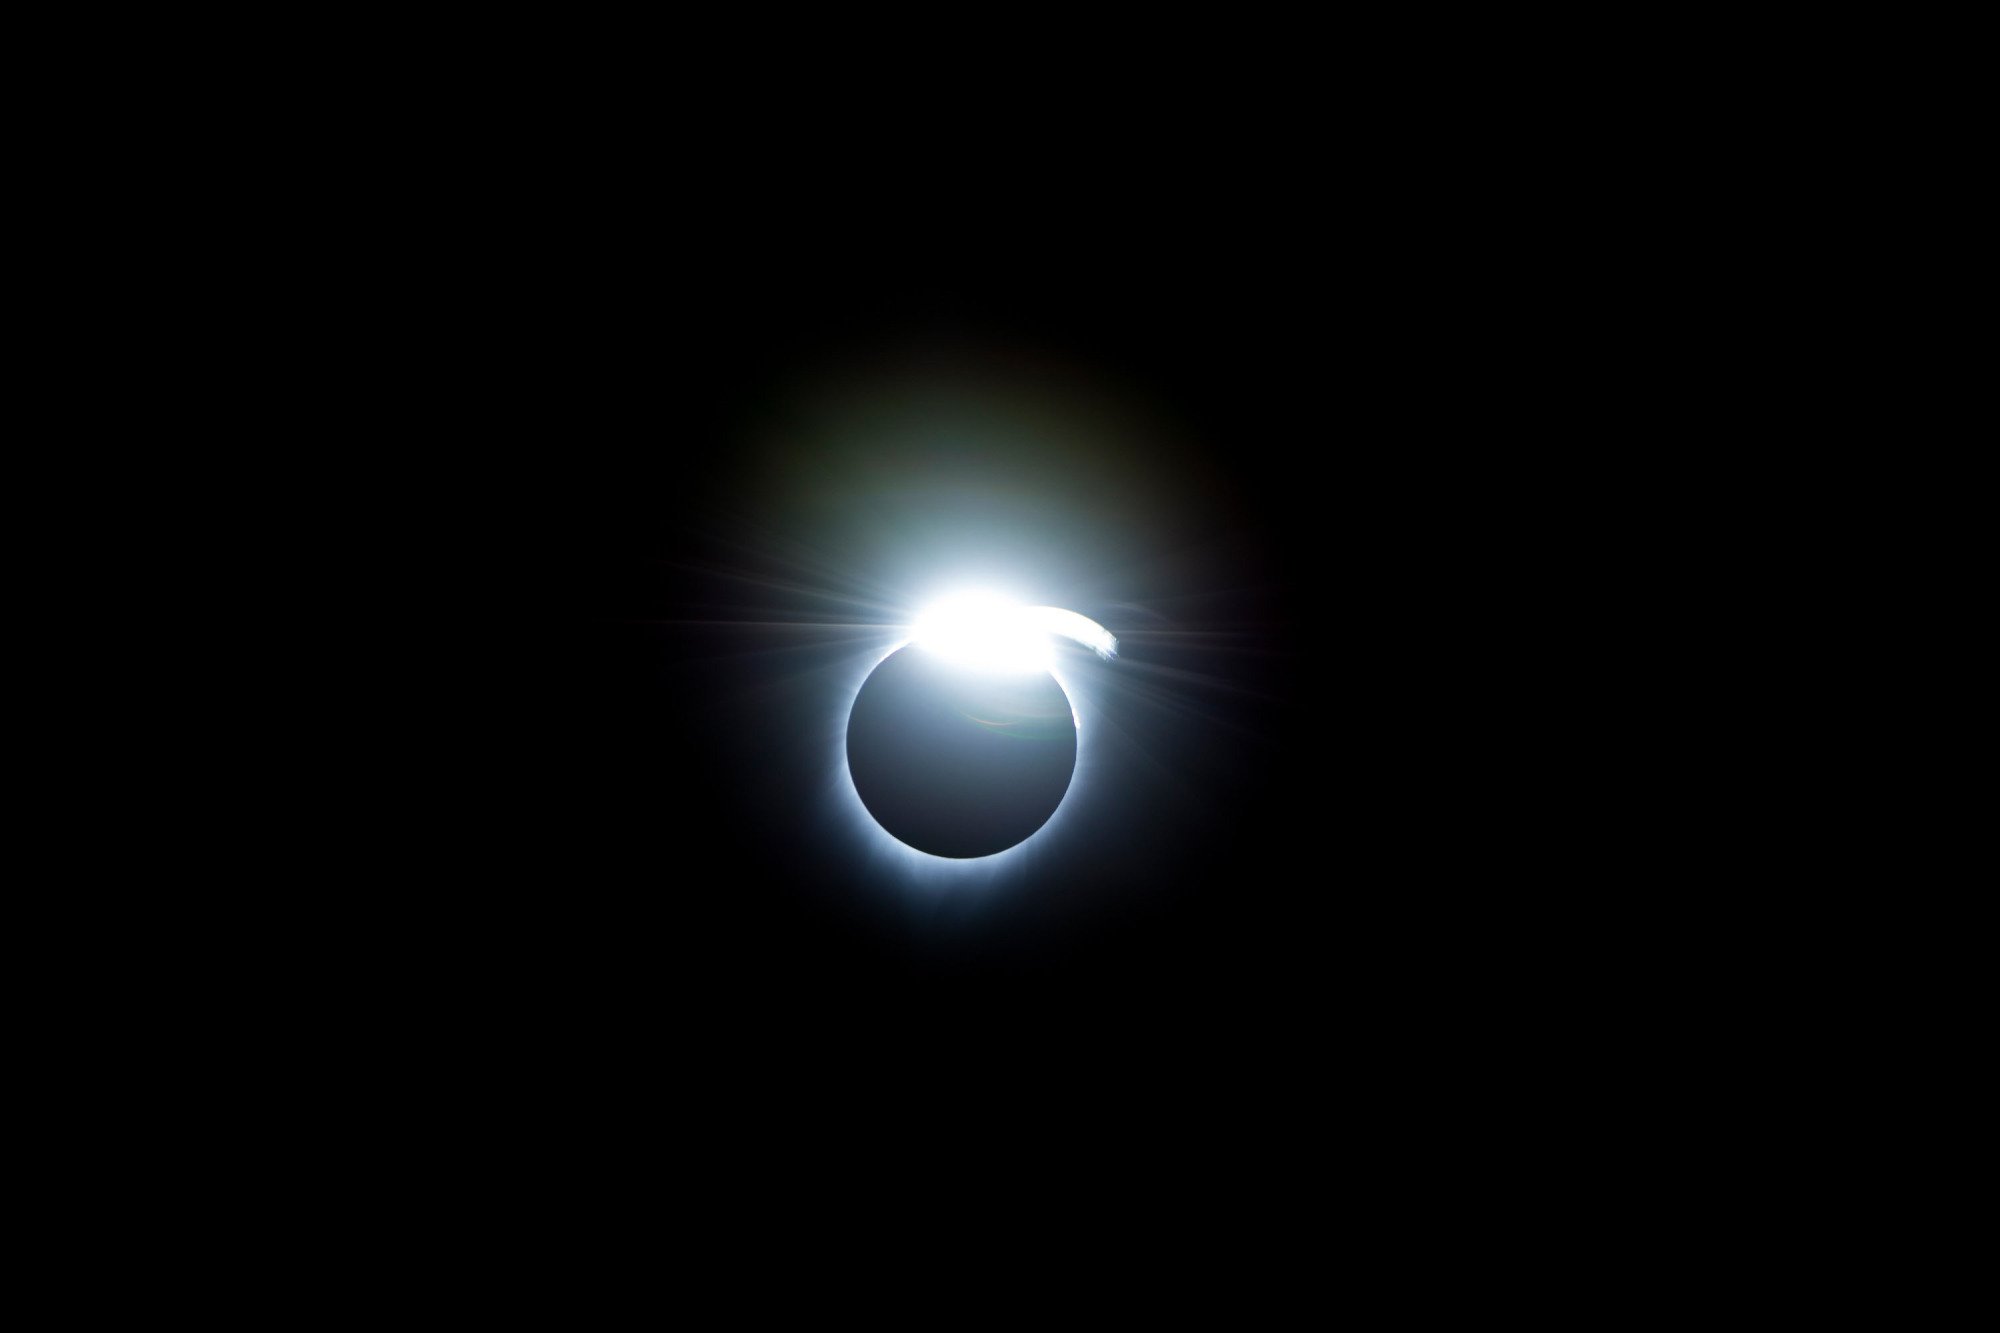 An image of the sun just before totality taken aboard NASA’s Gulfstream III jet in 2017.